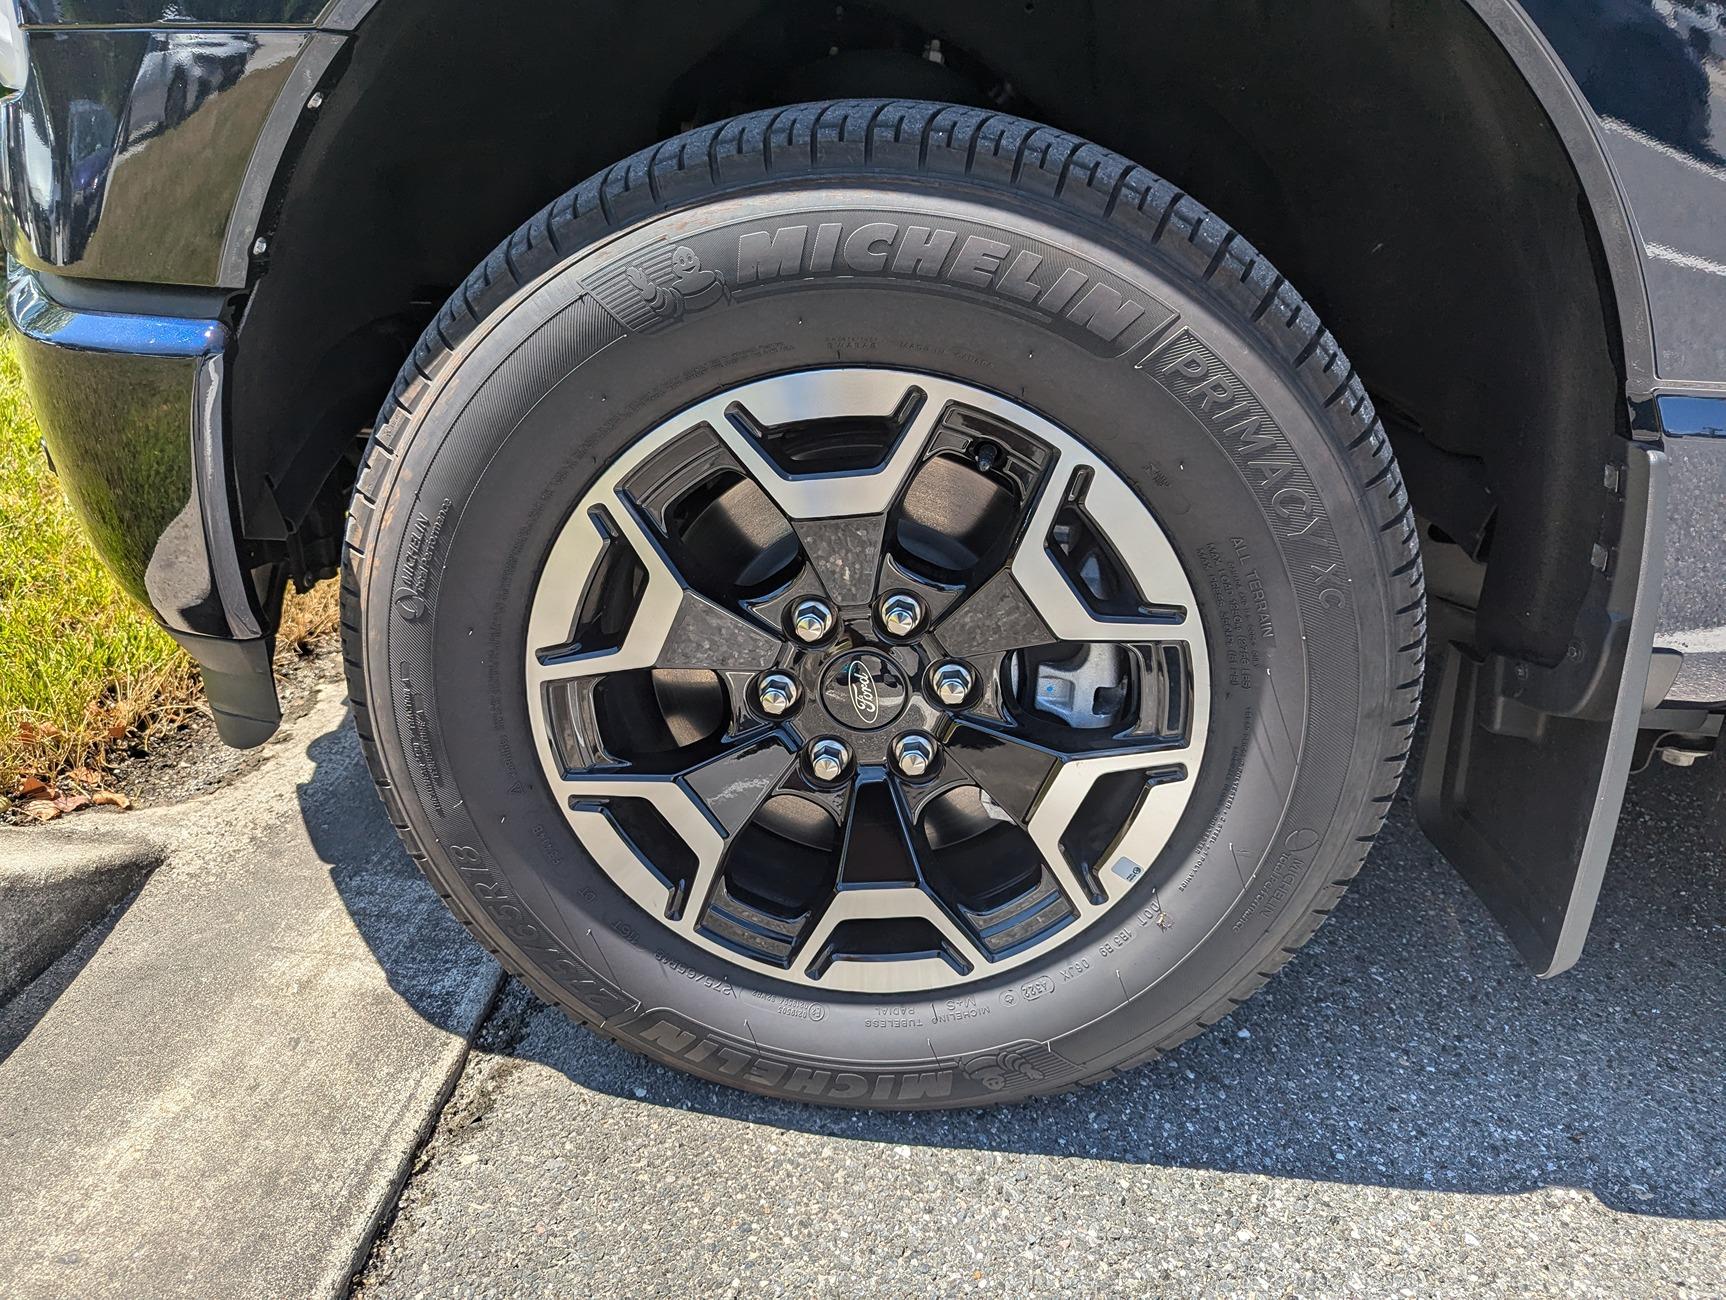 Ford F-150 Lightning XLT/PRO 18" Wheels and Tires w/ TPMS installed - 11,000 Miles on them - $900 PXL_20240701_152659025.MP